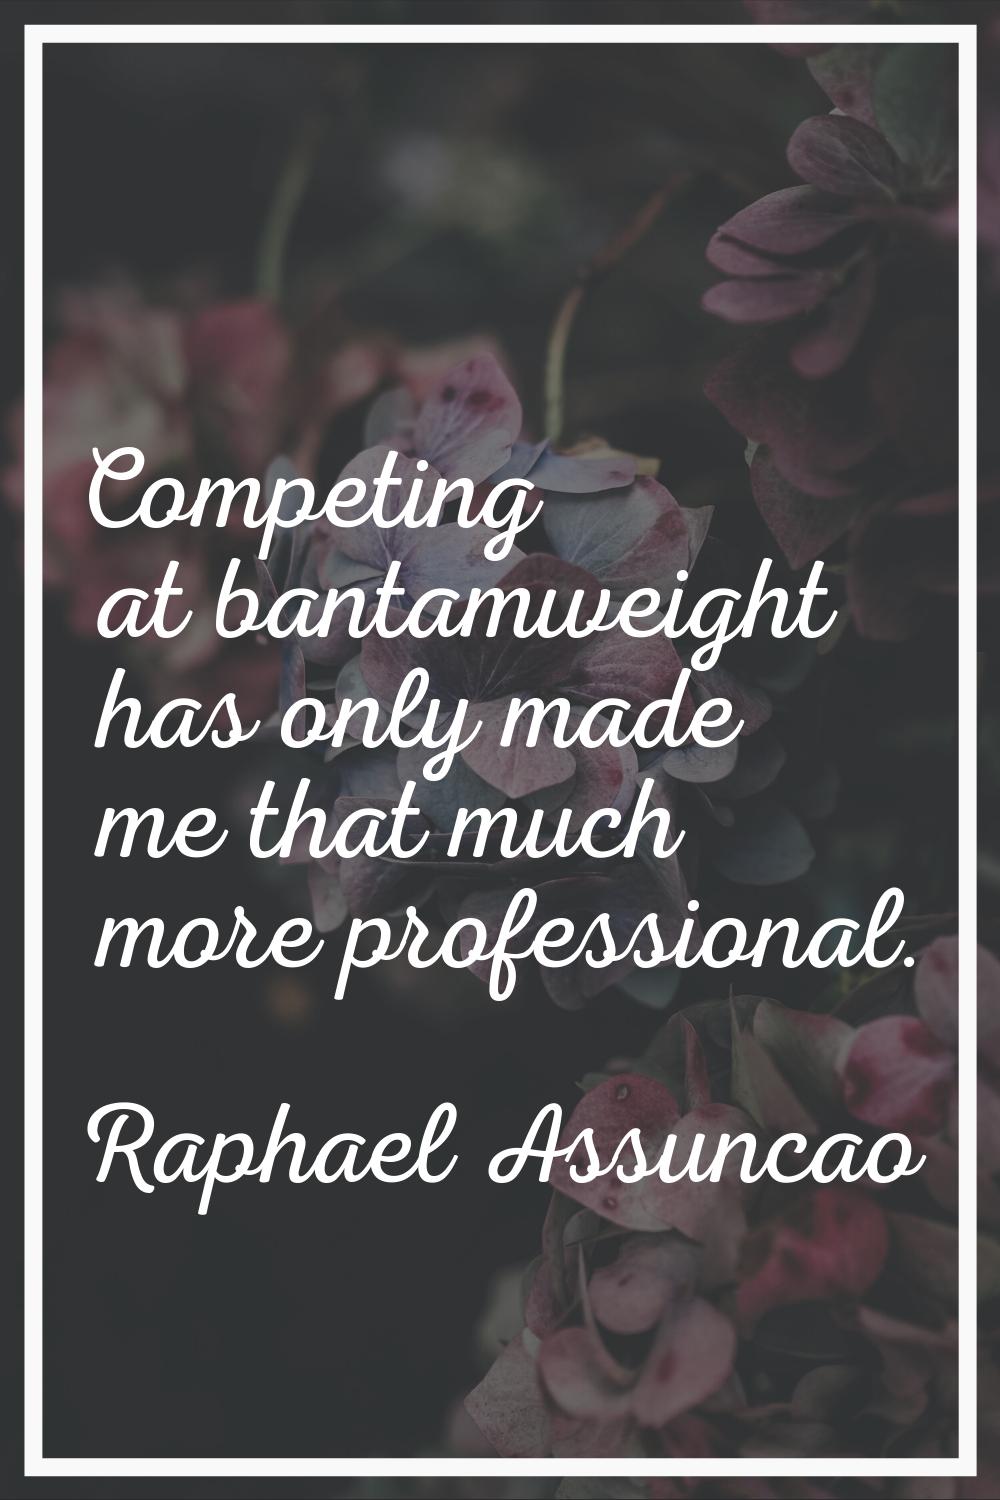 Competing at bantamweight has only made me that much more professional.